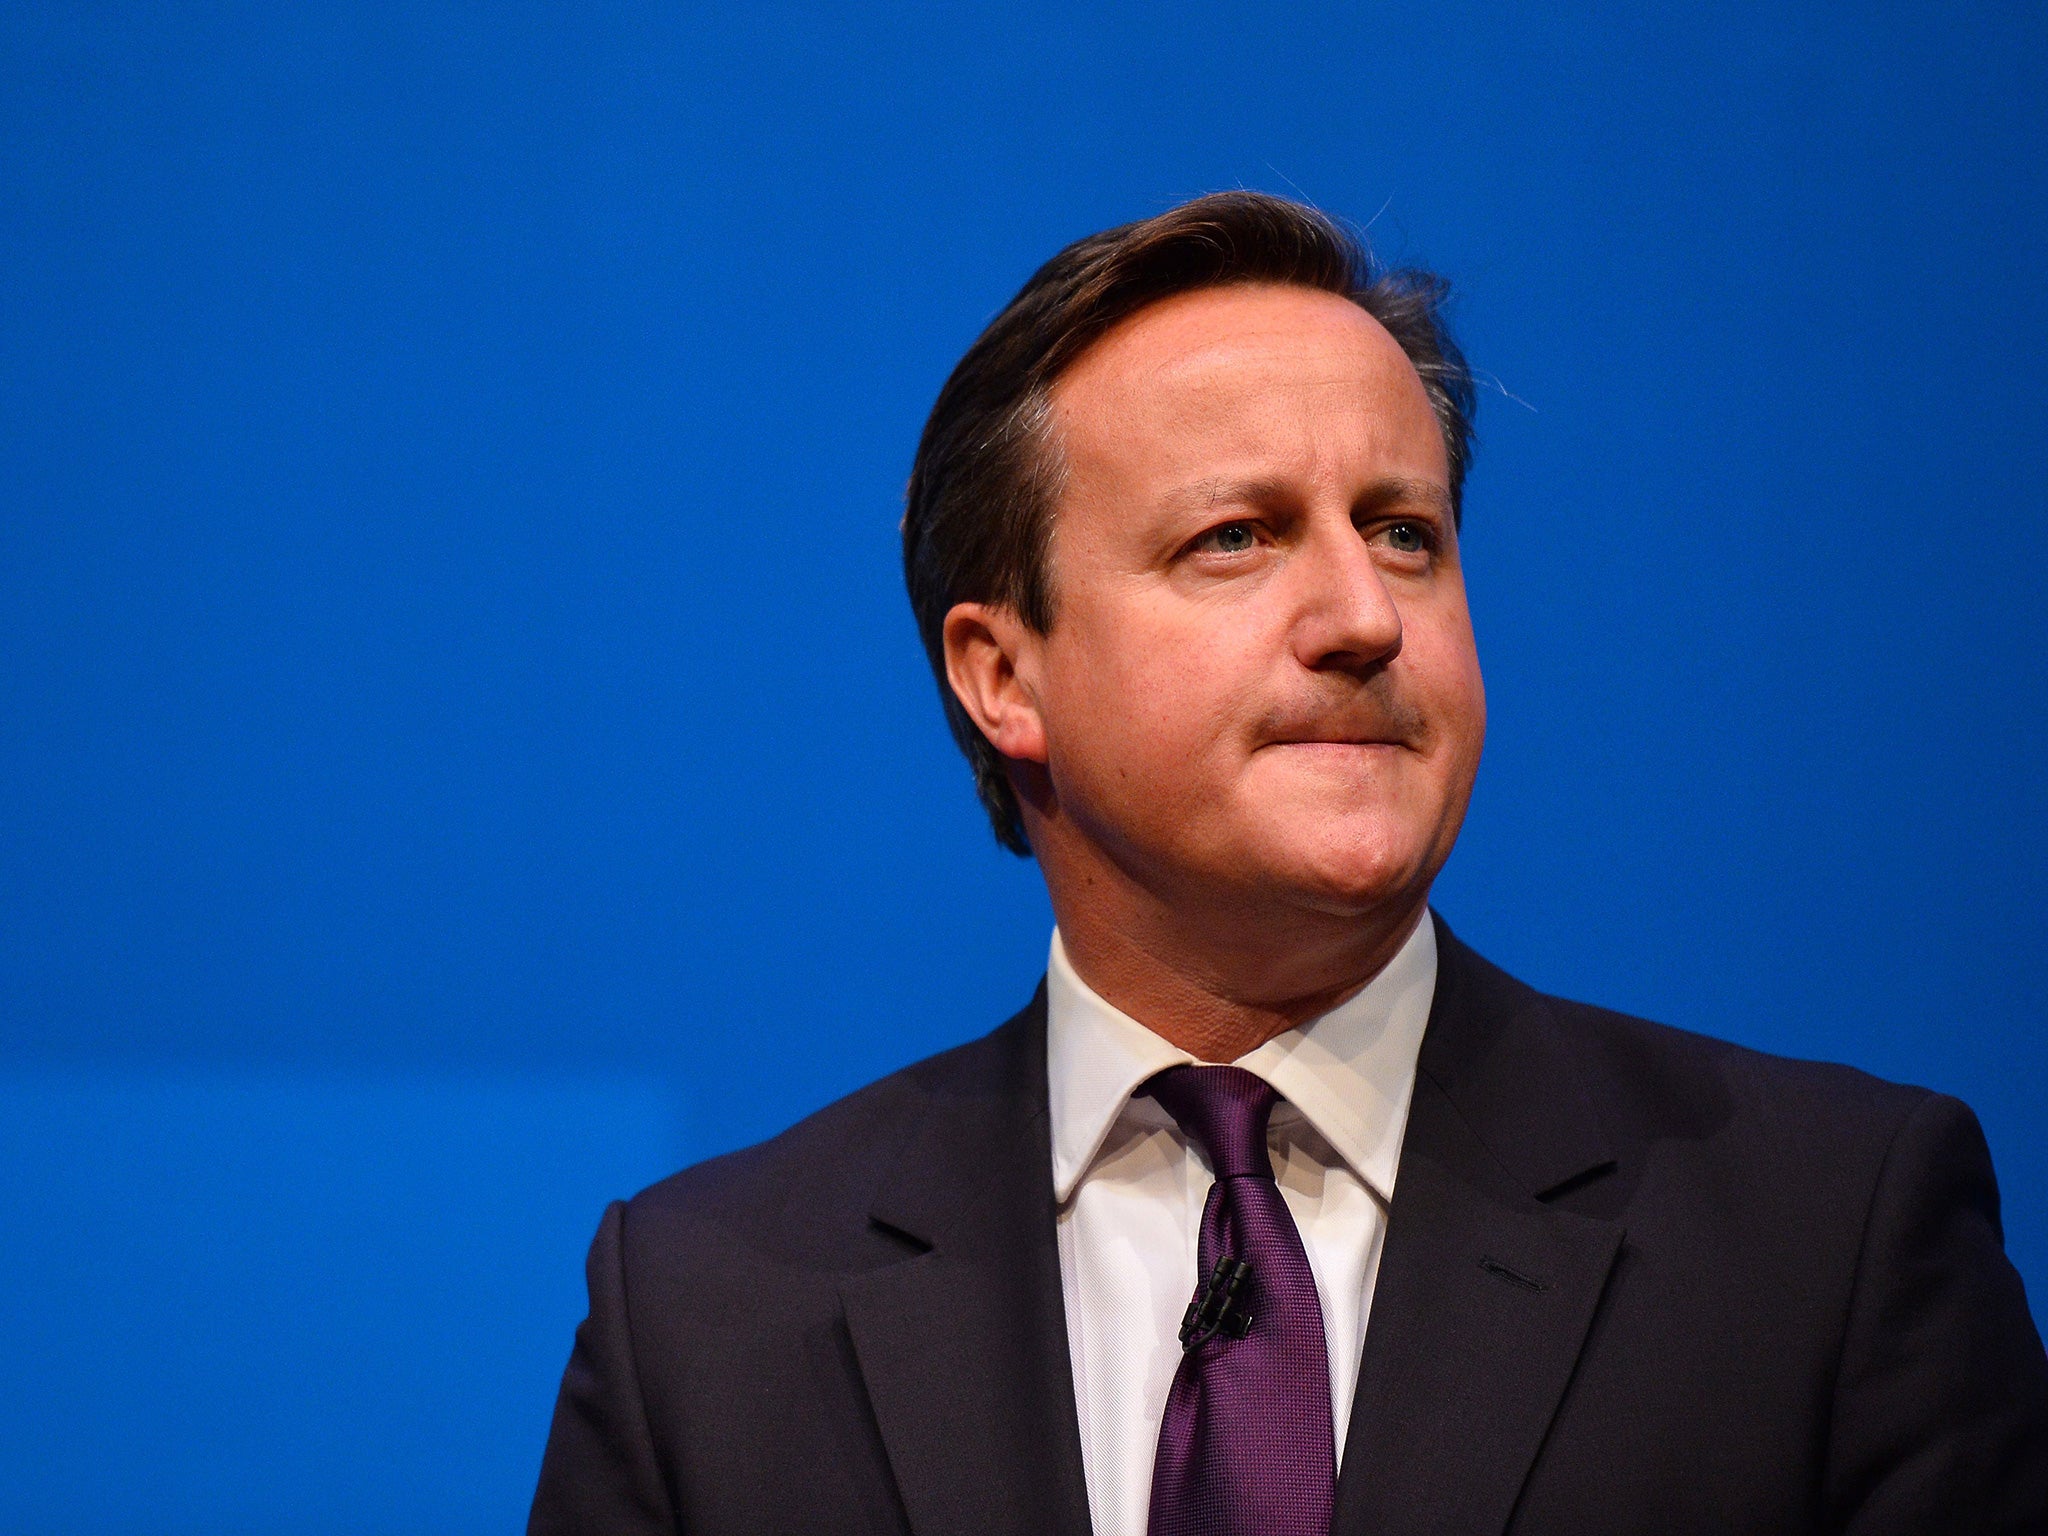 During the election campaign the Conservatives pledged to introduce the measure in 2017